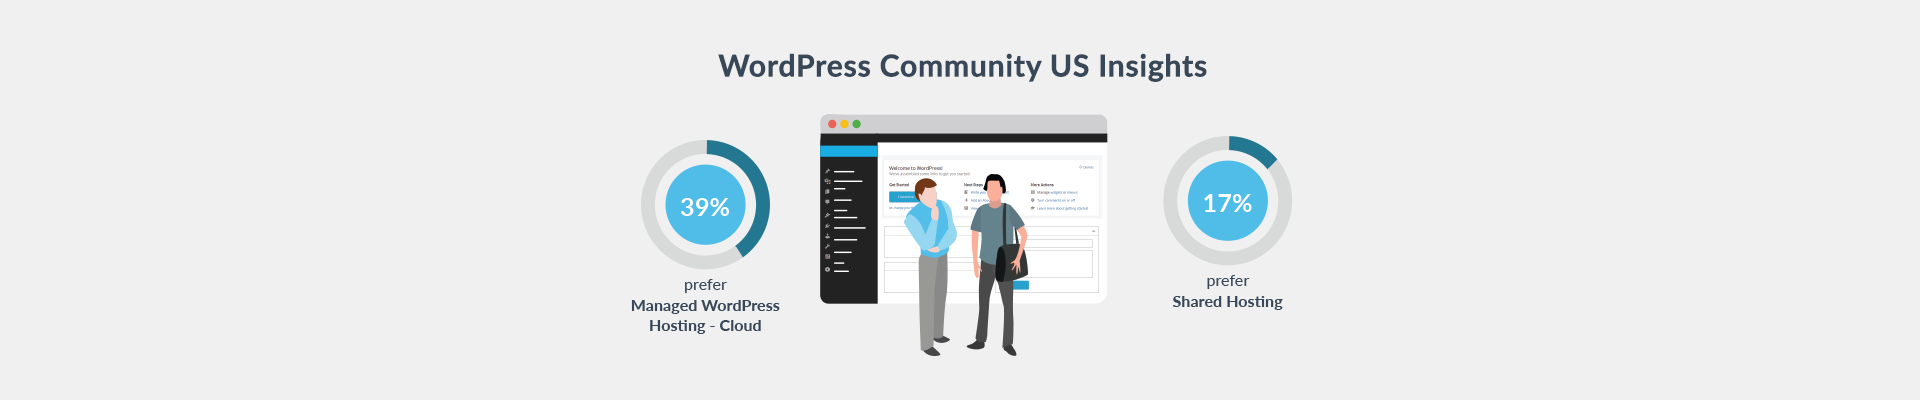 WordPress Community Insights You May Not Know - Plesk